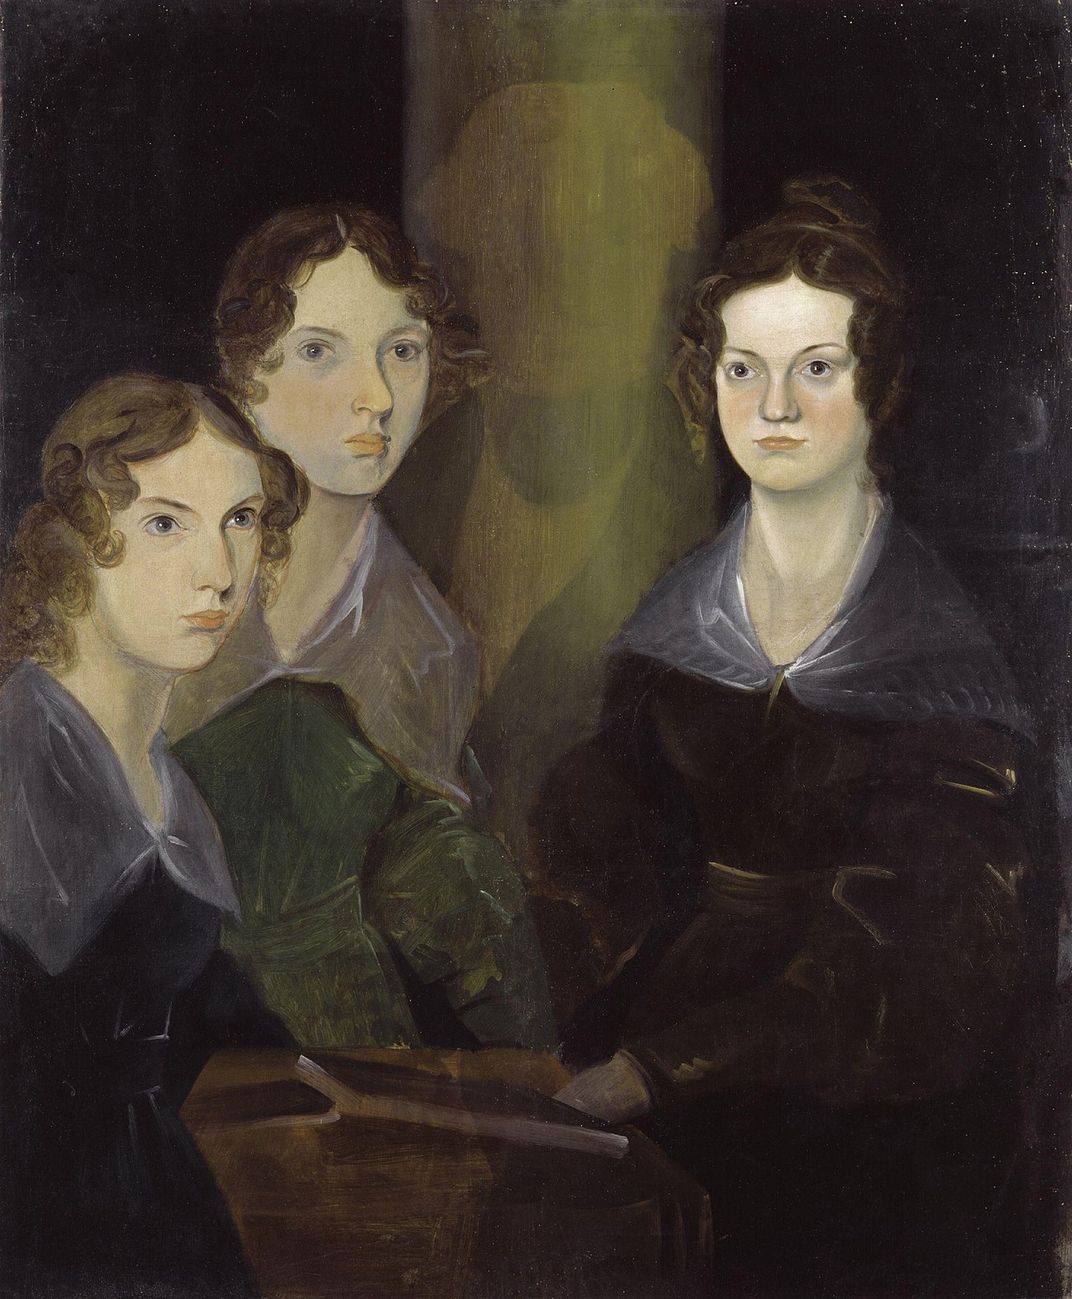 A digitally restored painting of the Brontë sisters by their brother, Branwell